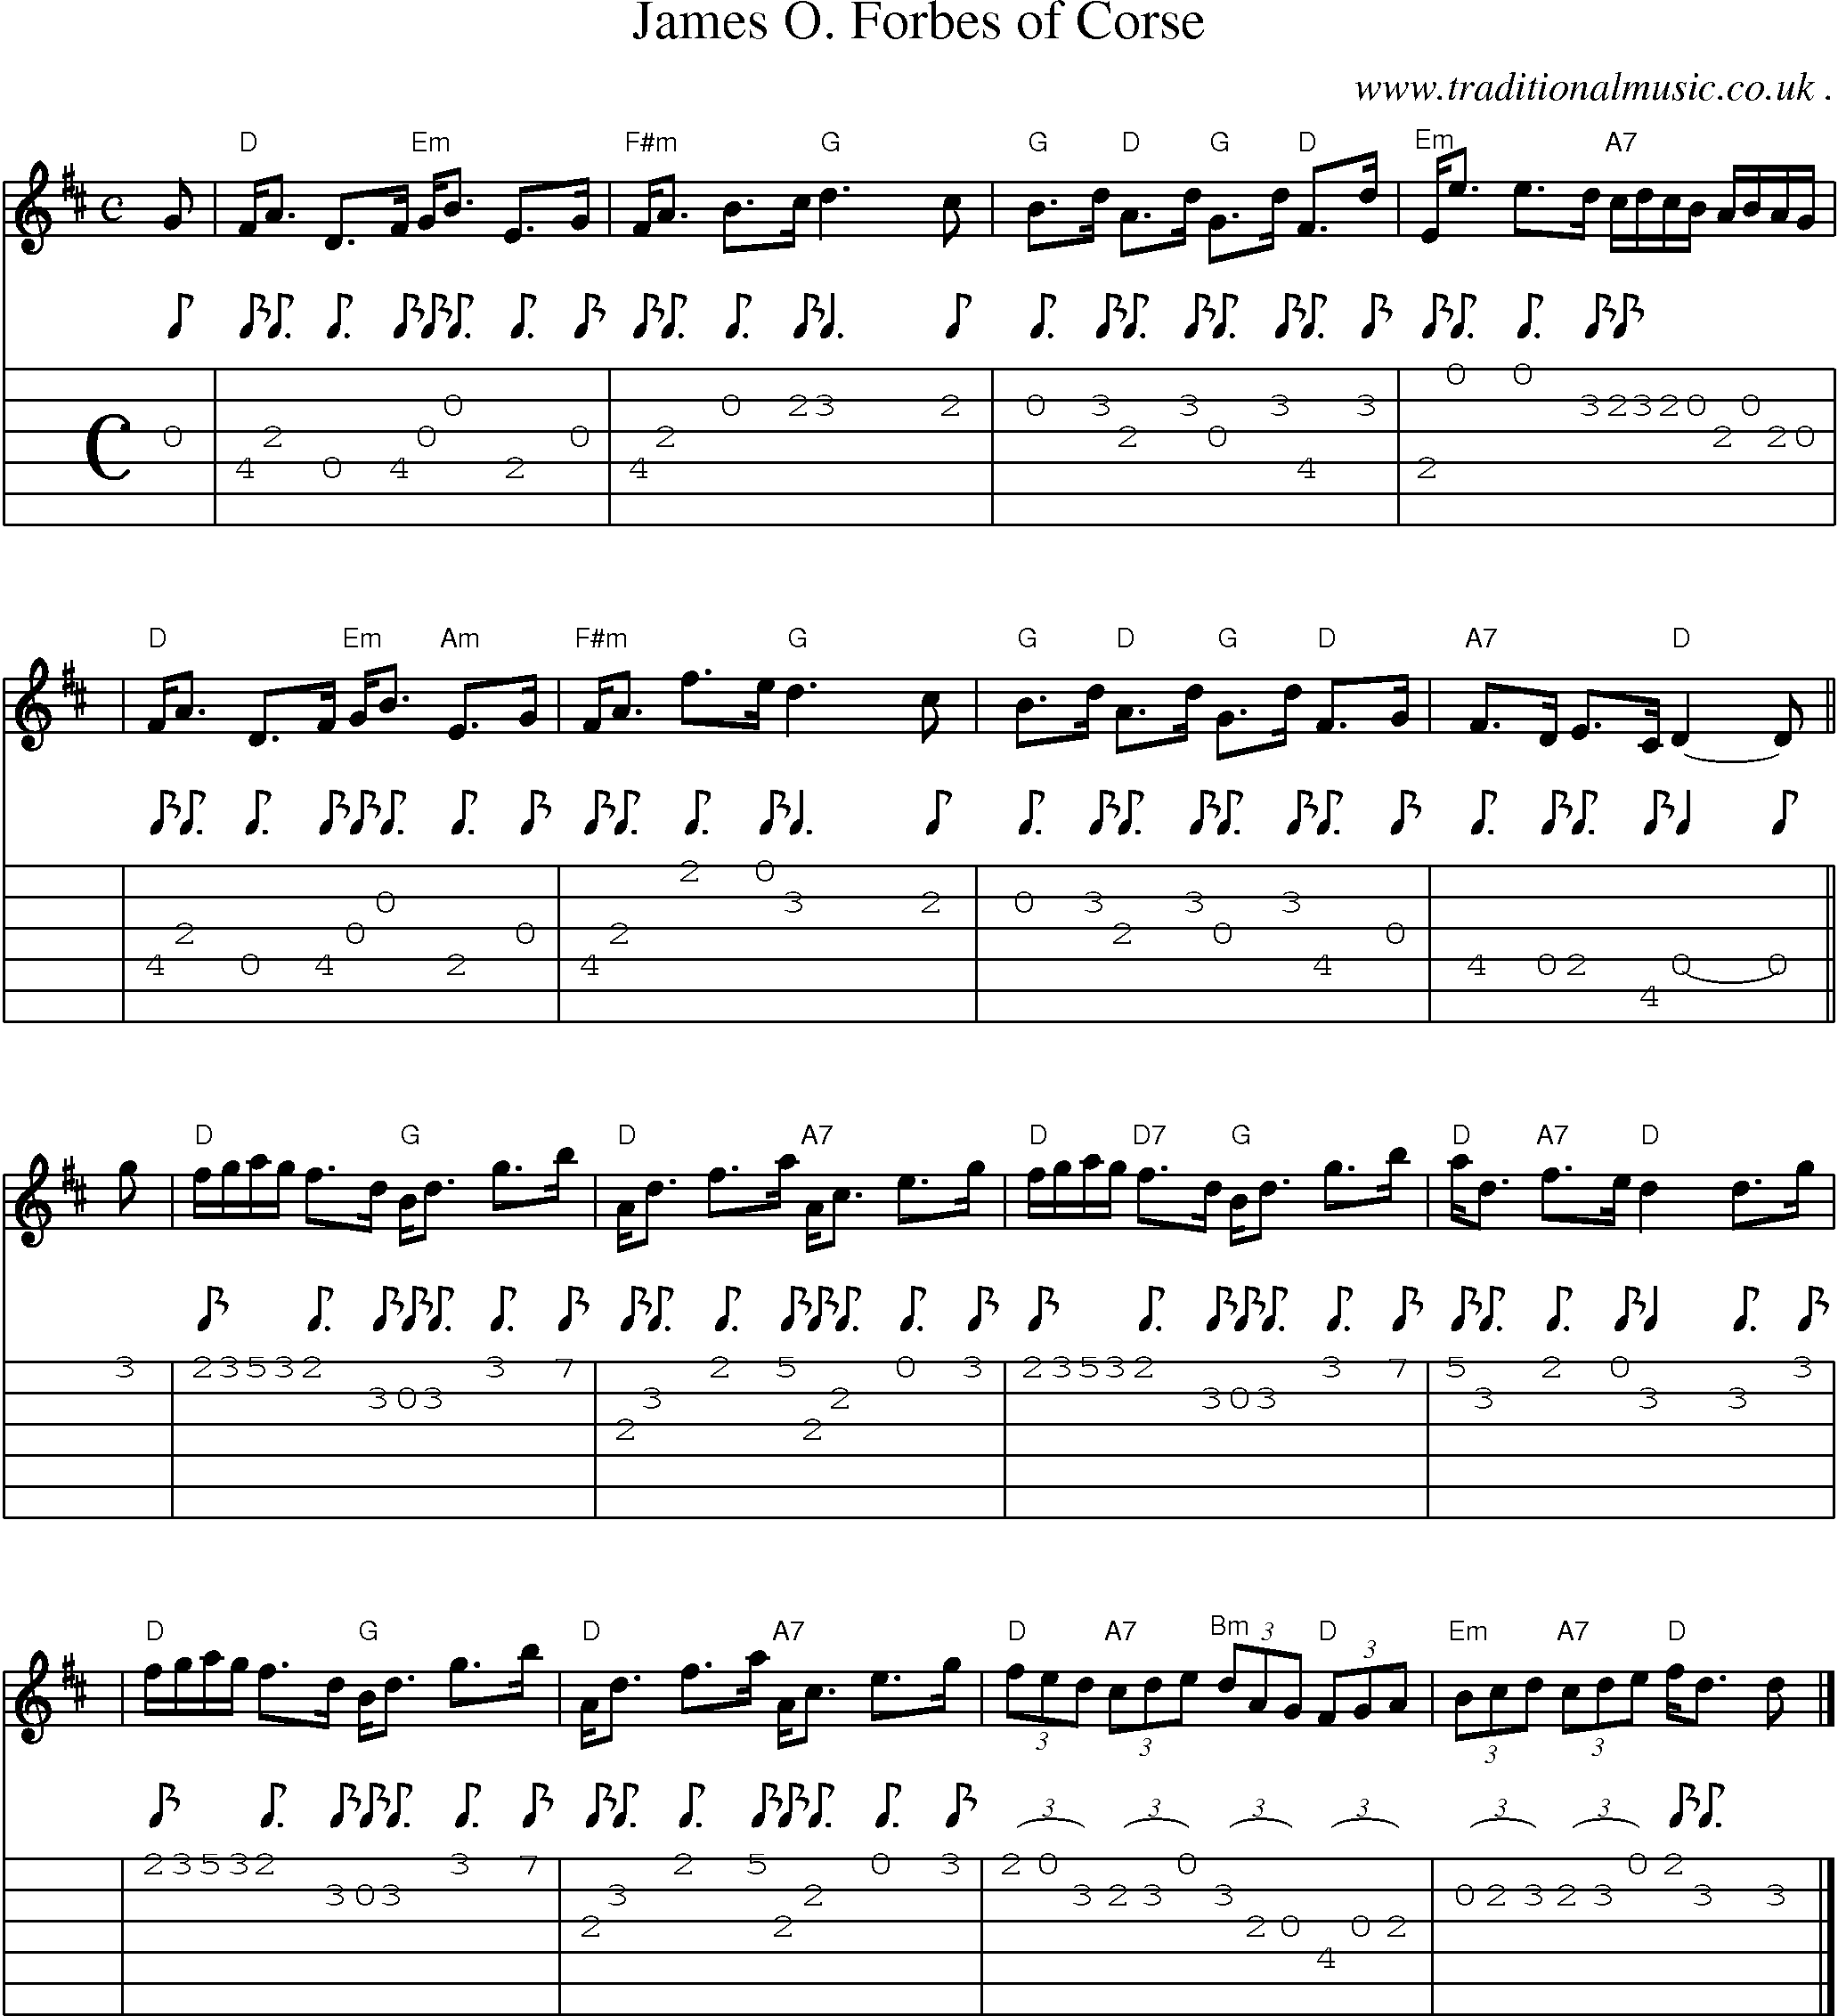 Sheet-music  score, Chords and Guitar Tabs for James O Forbes Of Corse